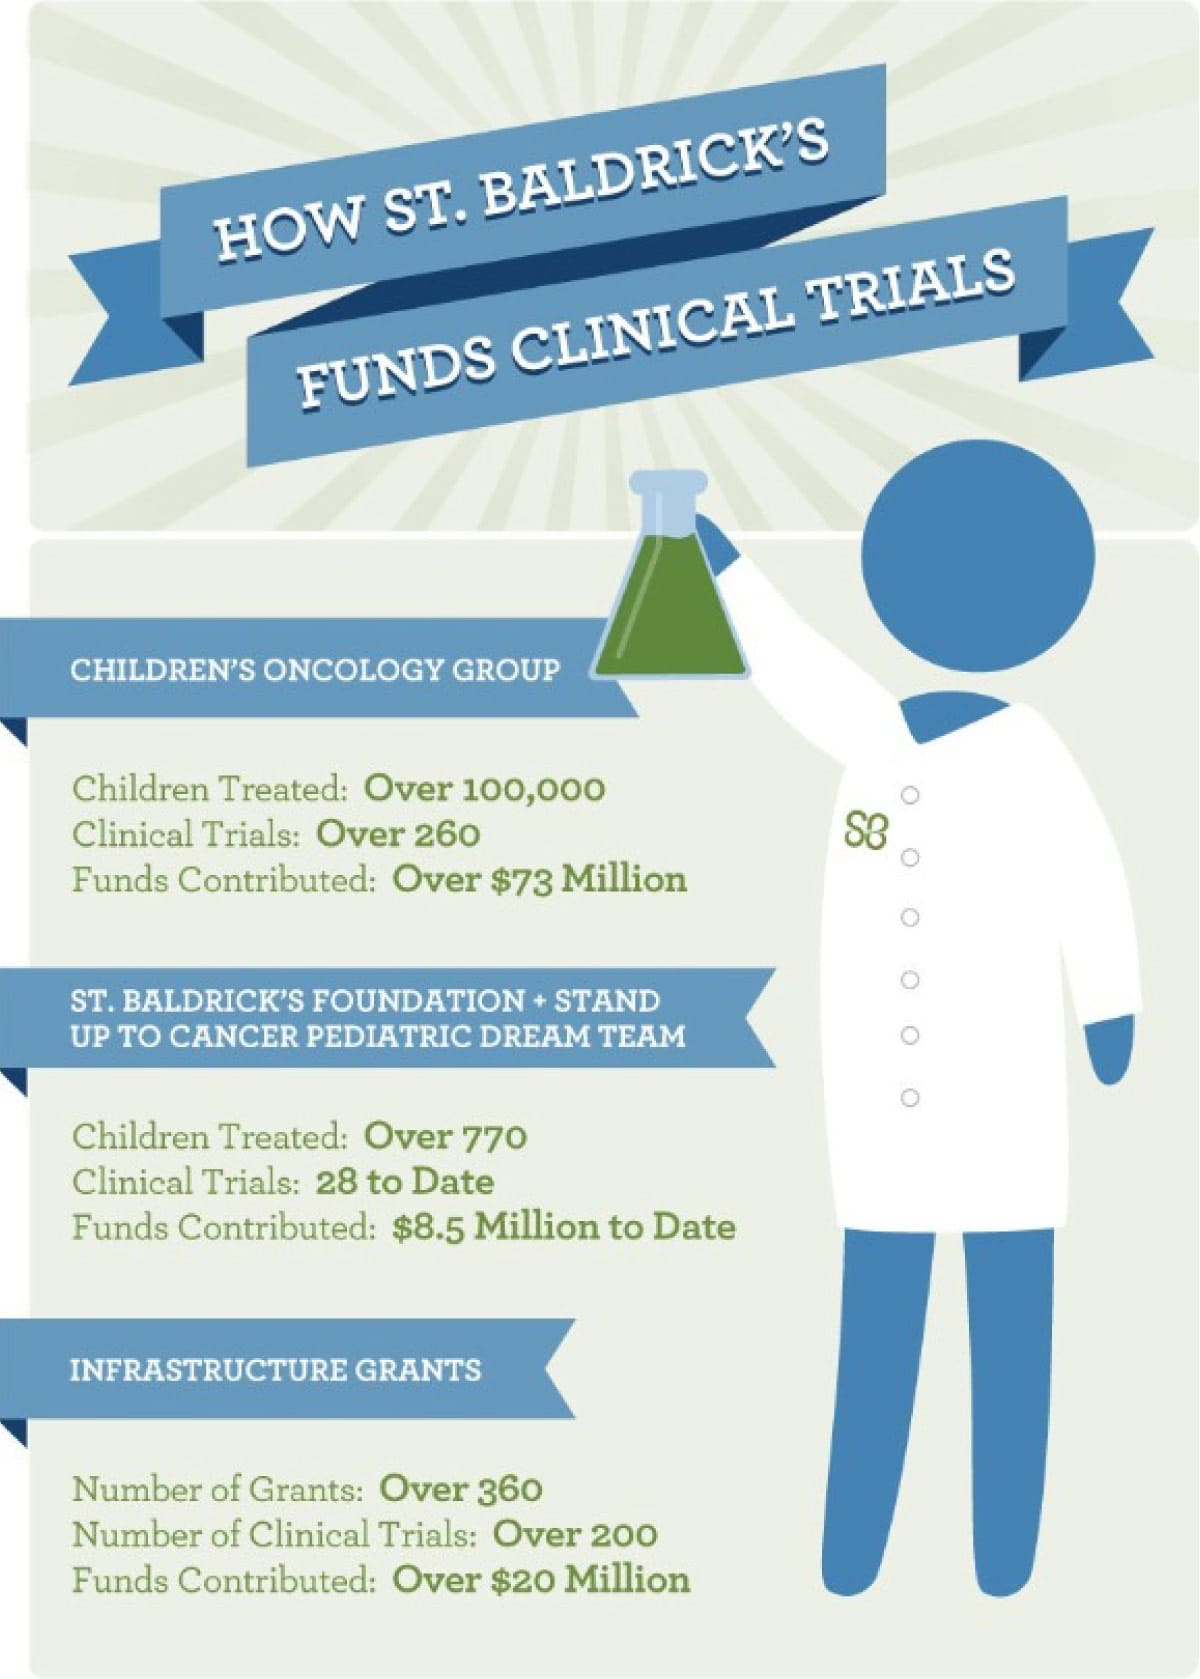 How St. baldrick's funds clinical trials infographic